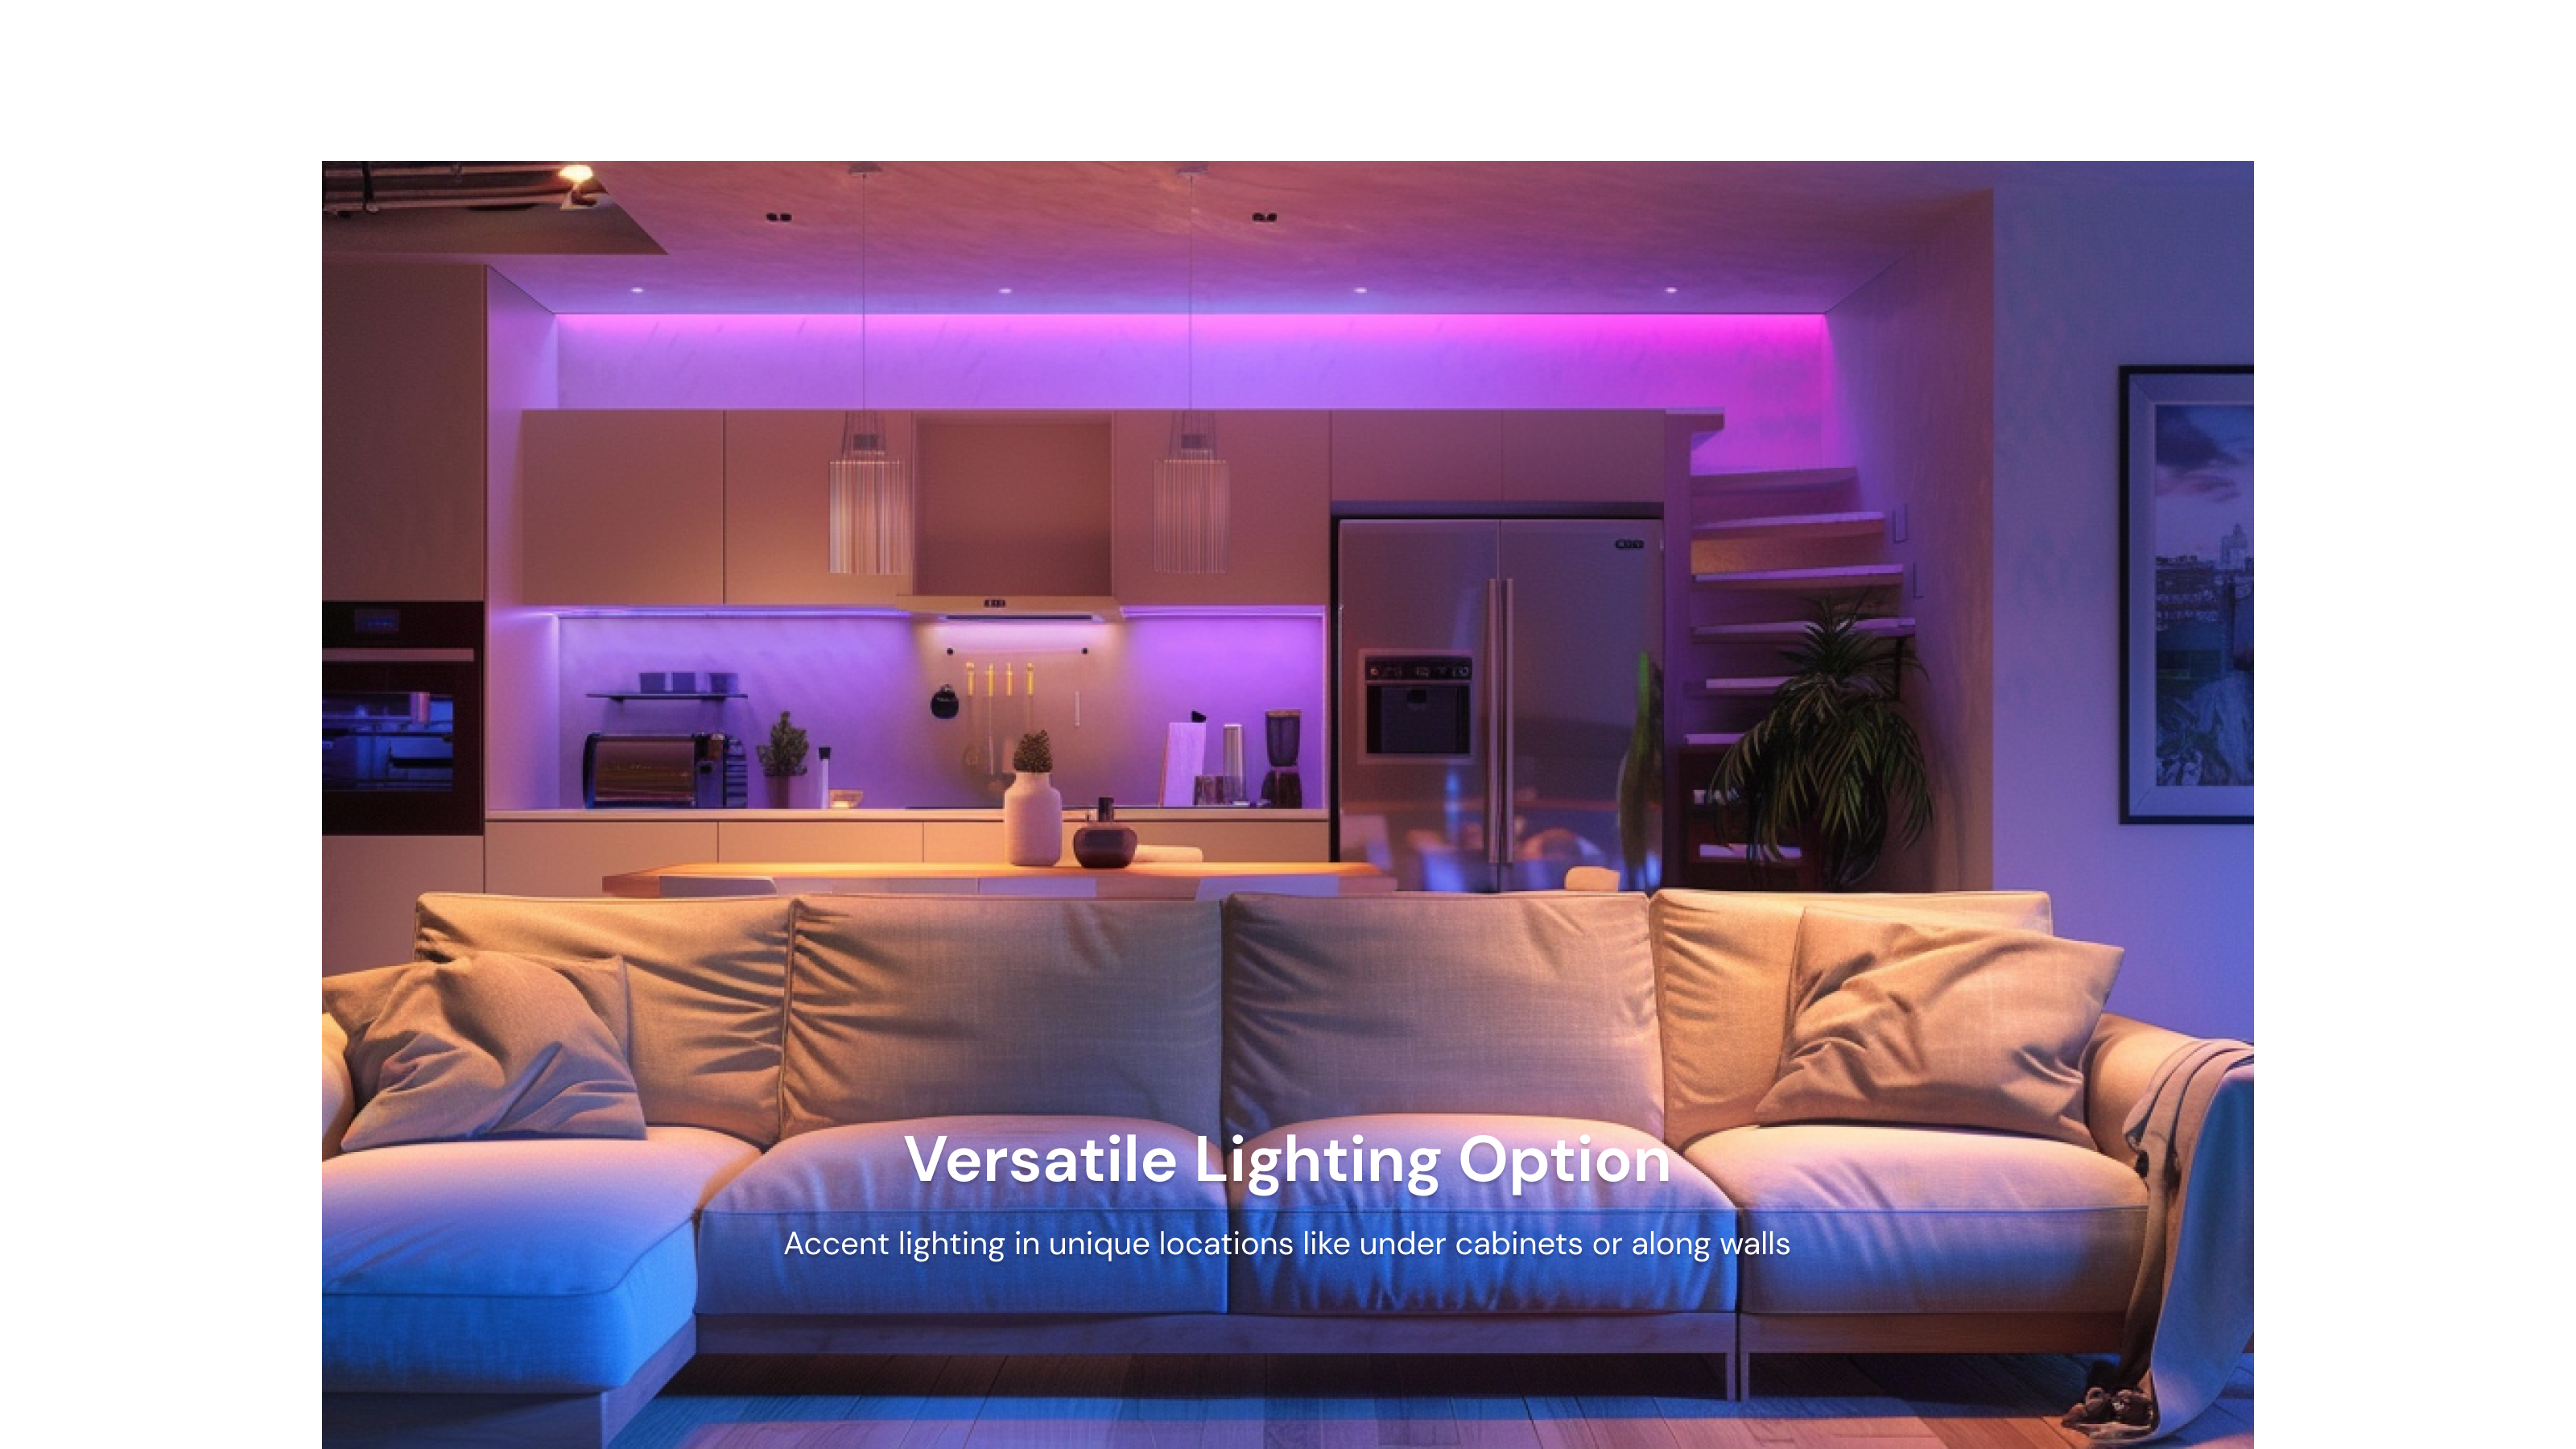 Upgrade your home lighting with the Sengled Bluetooth RGBW Light Strip. Enjoy smart control, vibrant colors, scheduling, and versatile placement options for tasks, accents, and whole-home installations. Perfect for LED under cabinet lighting, shop lights, porch lights, ceiling fixtures, closet lights, and more.